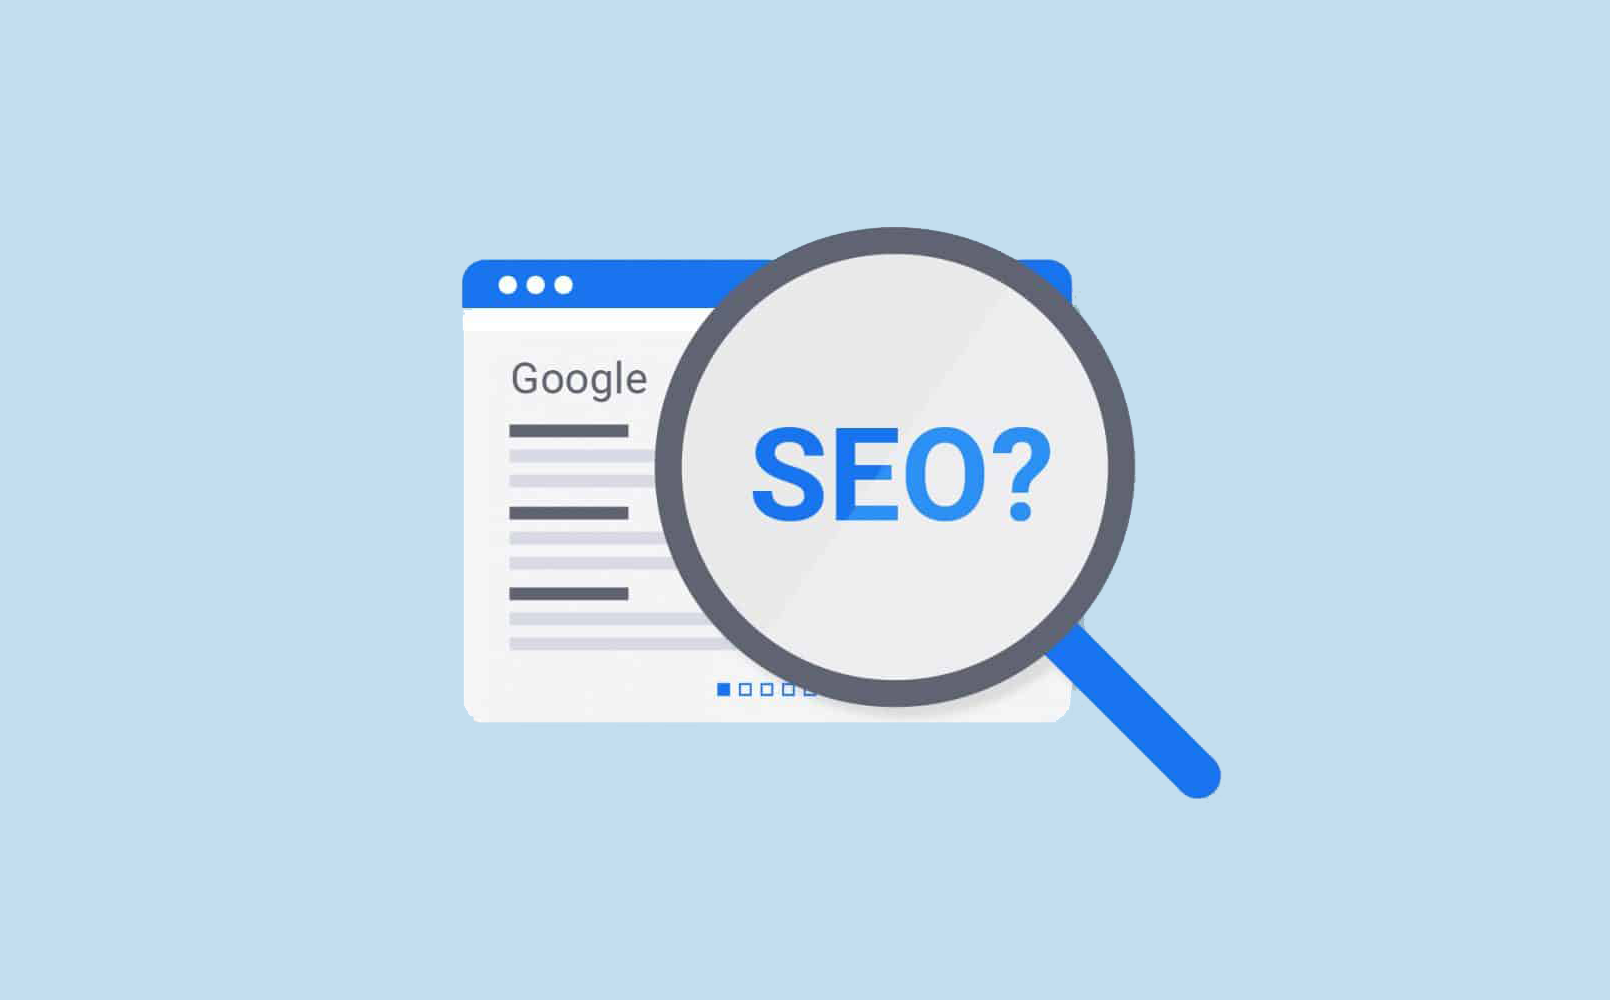 7 Things to Look in a SEO Expert